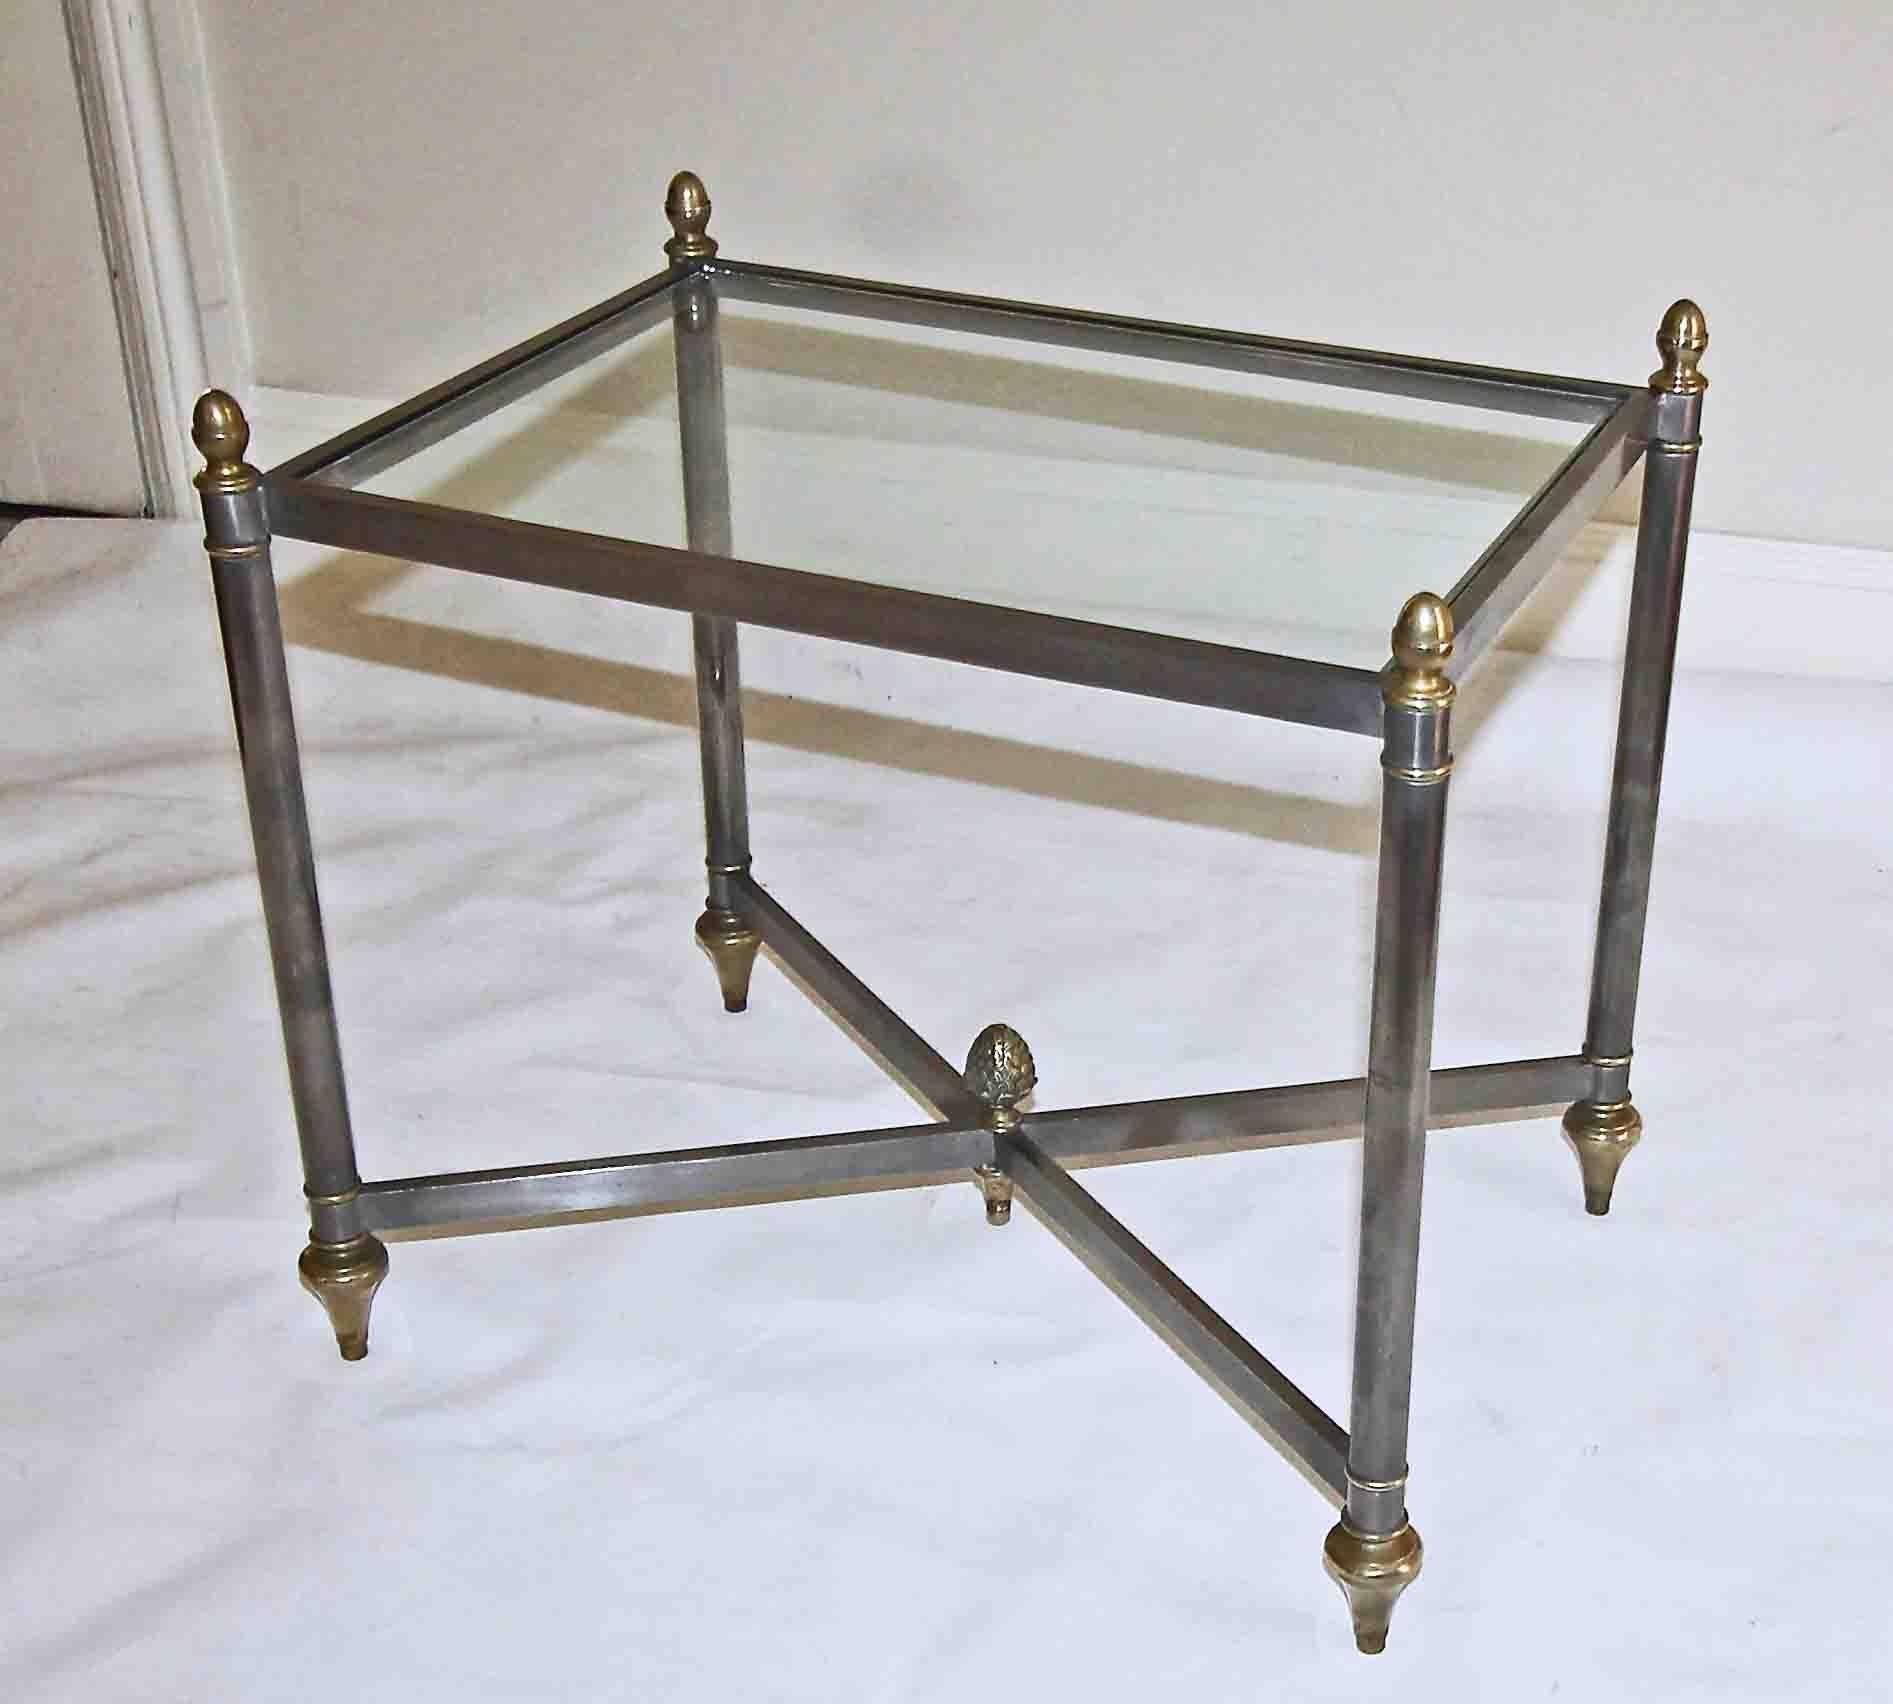 Smaller scale Italian brass and steel square shaped end/side table with newer clear glass insert. Measures: Table height 16